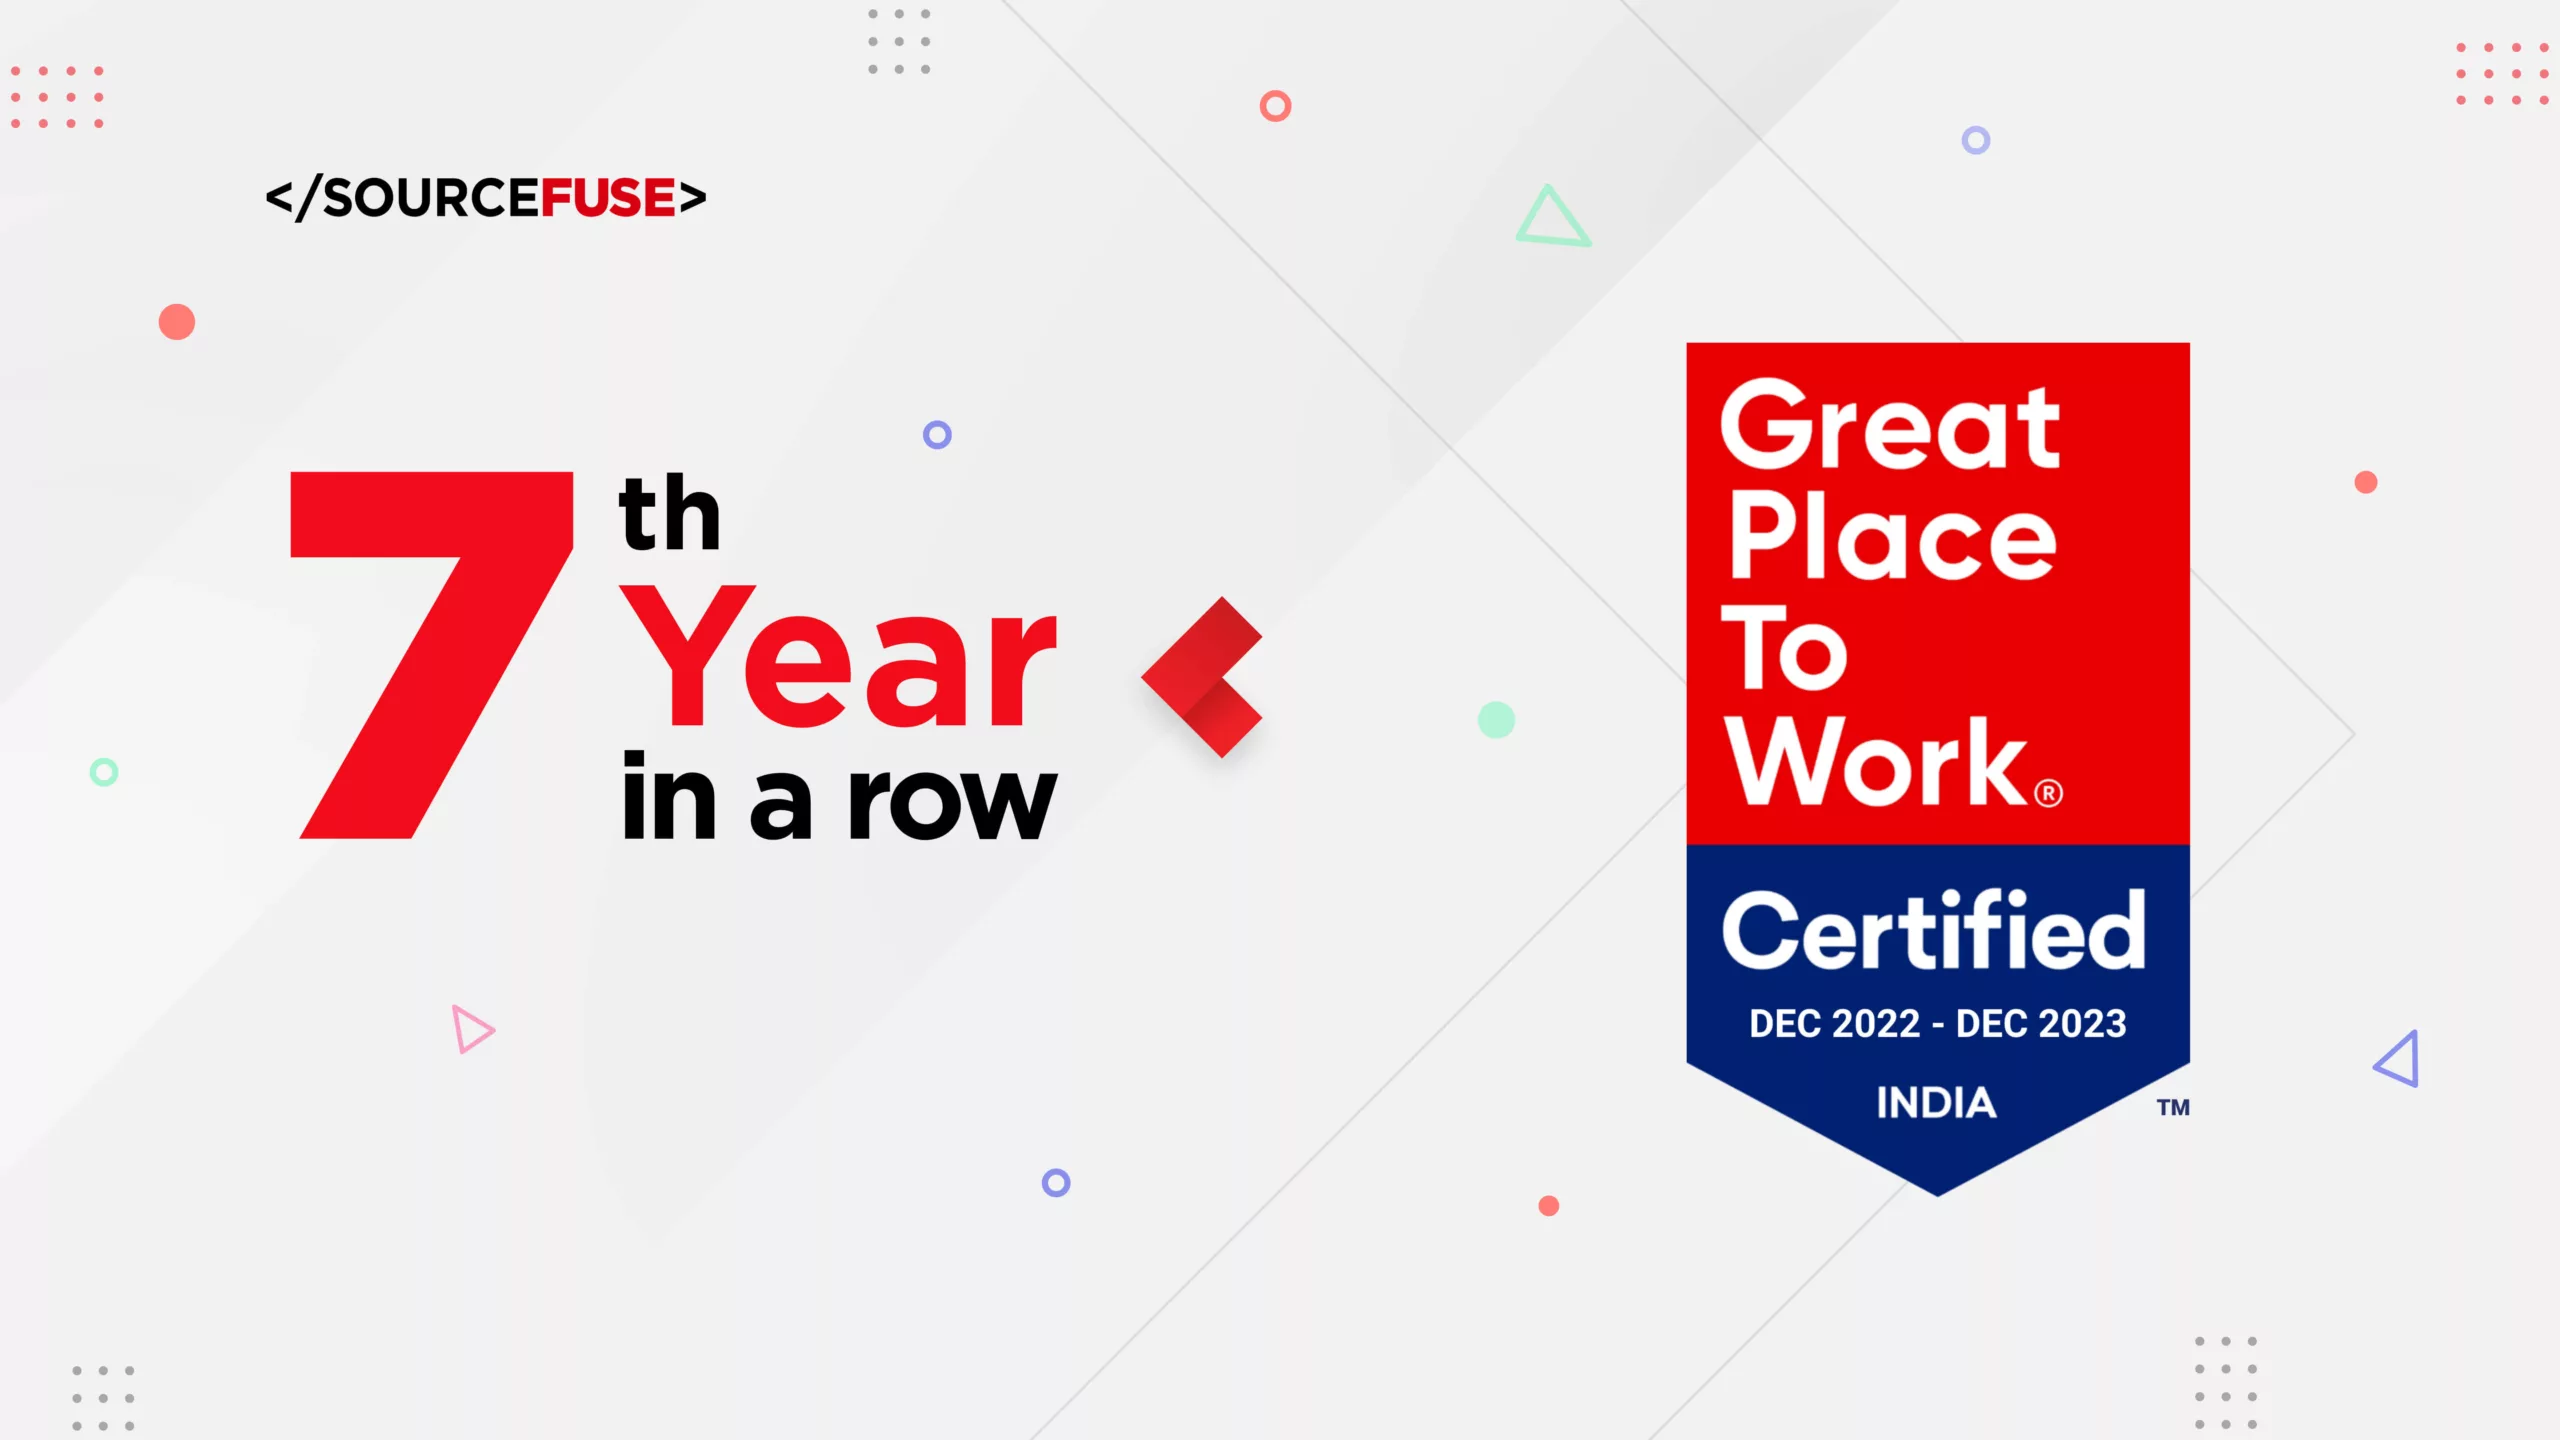 Great Place to Work – SourceFuse Recognized for 7th Year Running